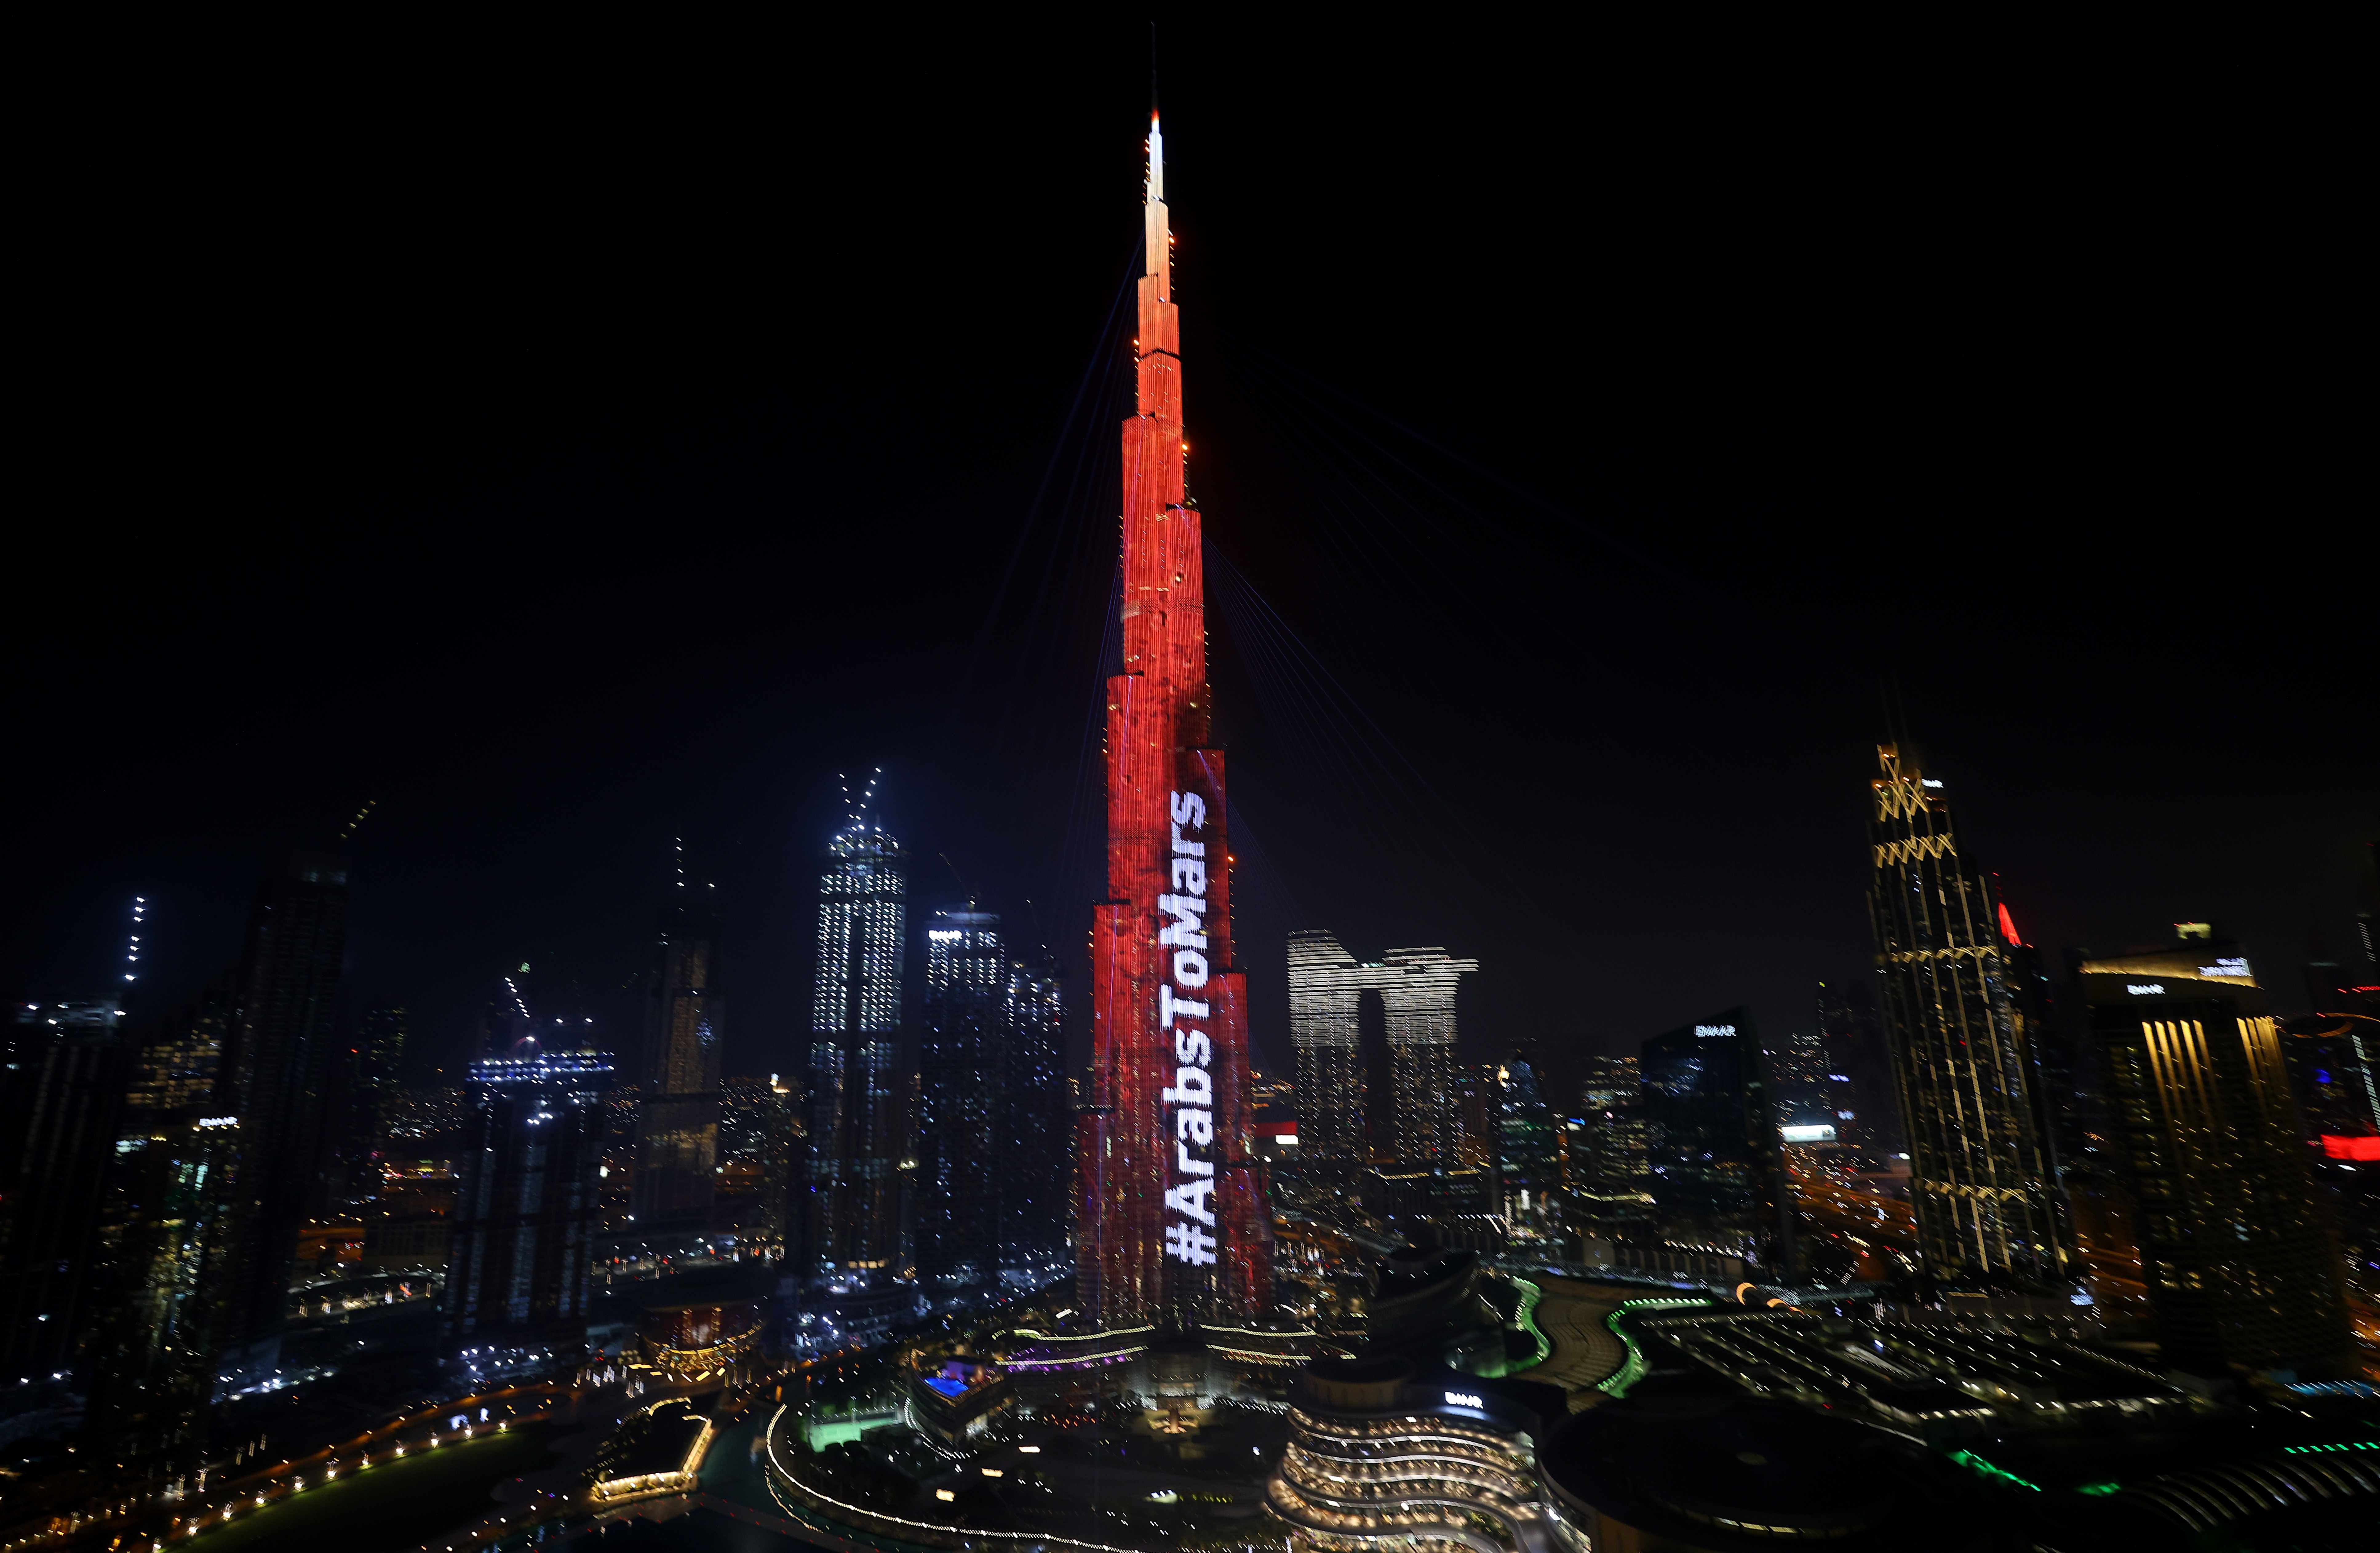 Dubai's Burj Khalifa is lit up in red on February 9, 2021 as the UAE's "Al-Amal" -- Arabic for "Hope" -- probe's to Mars carries out a tricky manoeuvre to enter the Red Planet's orbit. Credit: AFP Photo